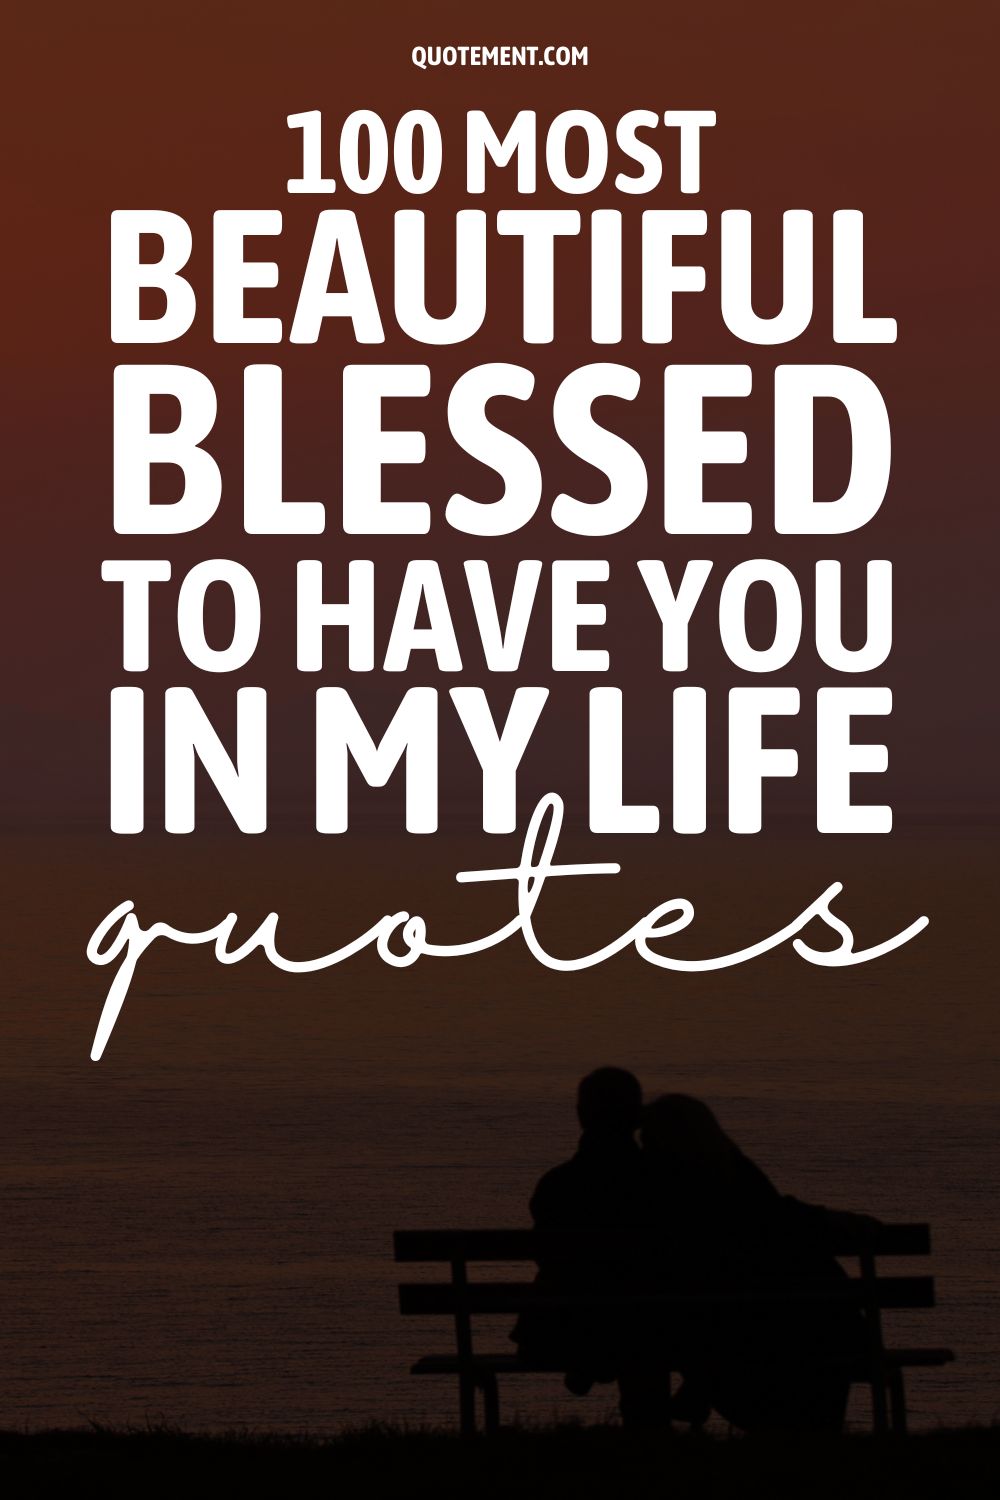 100 Most Beautiful Blessed To Have You In My Life Quotes
